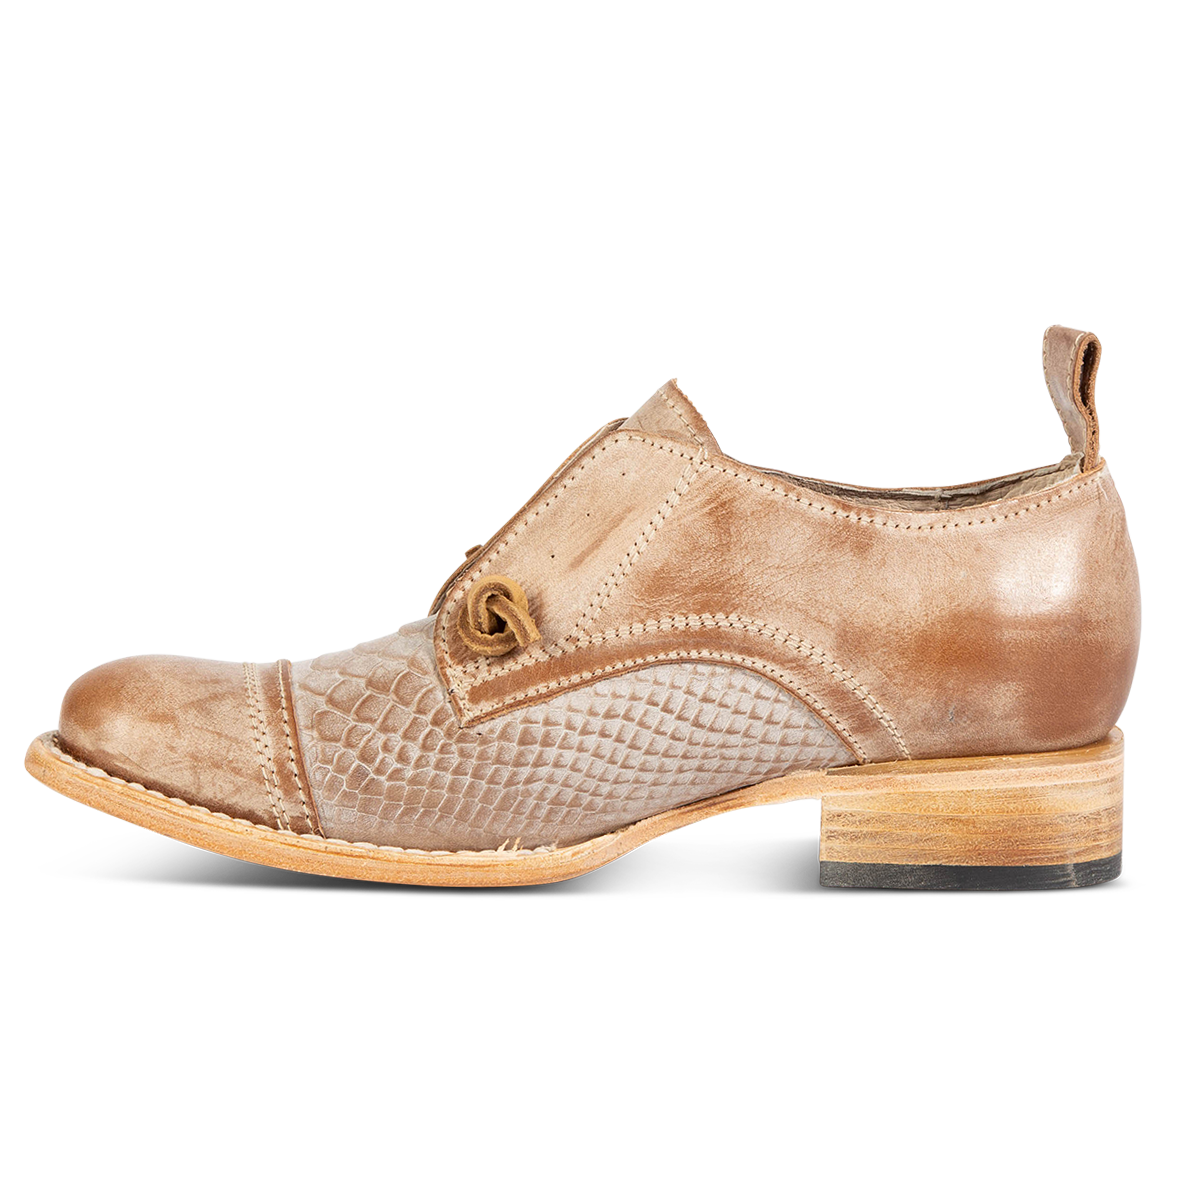 Inside view showing stitch detailing and low heel on FREEBIRD women's Mabel taupe multi shoe